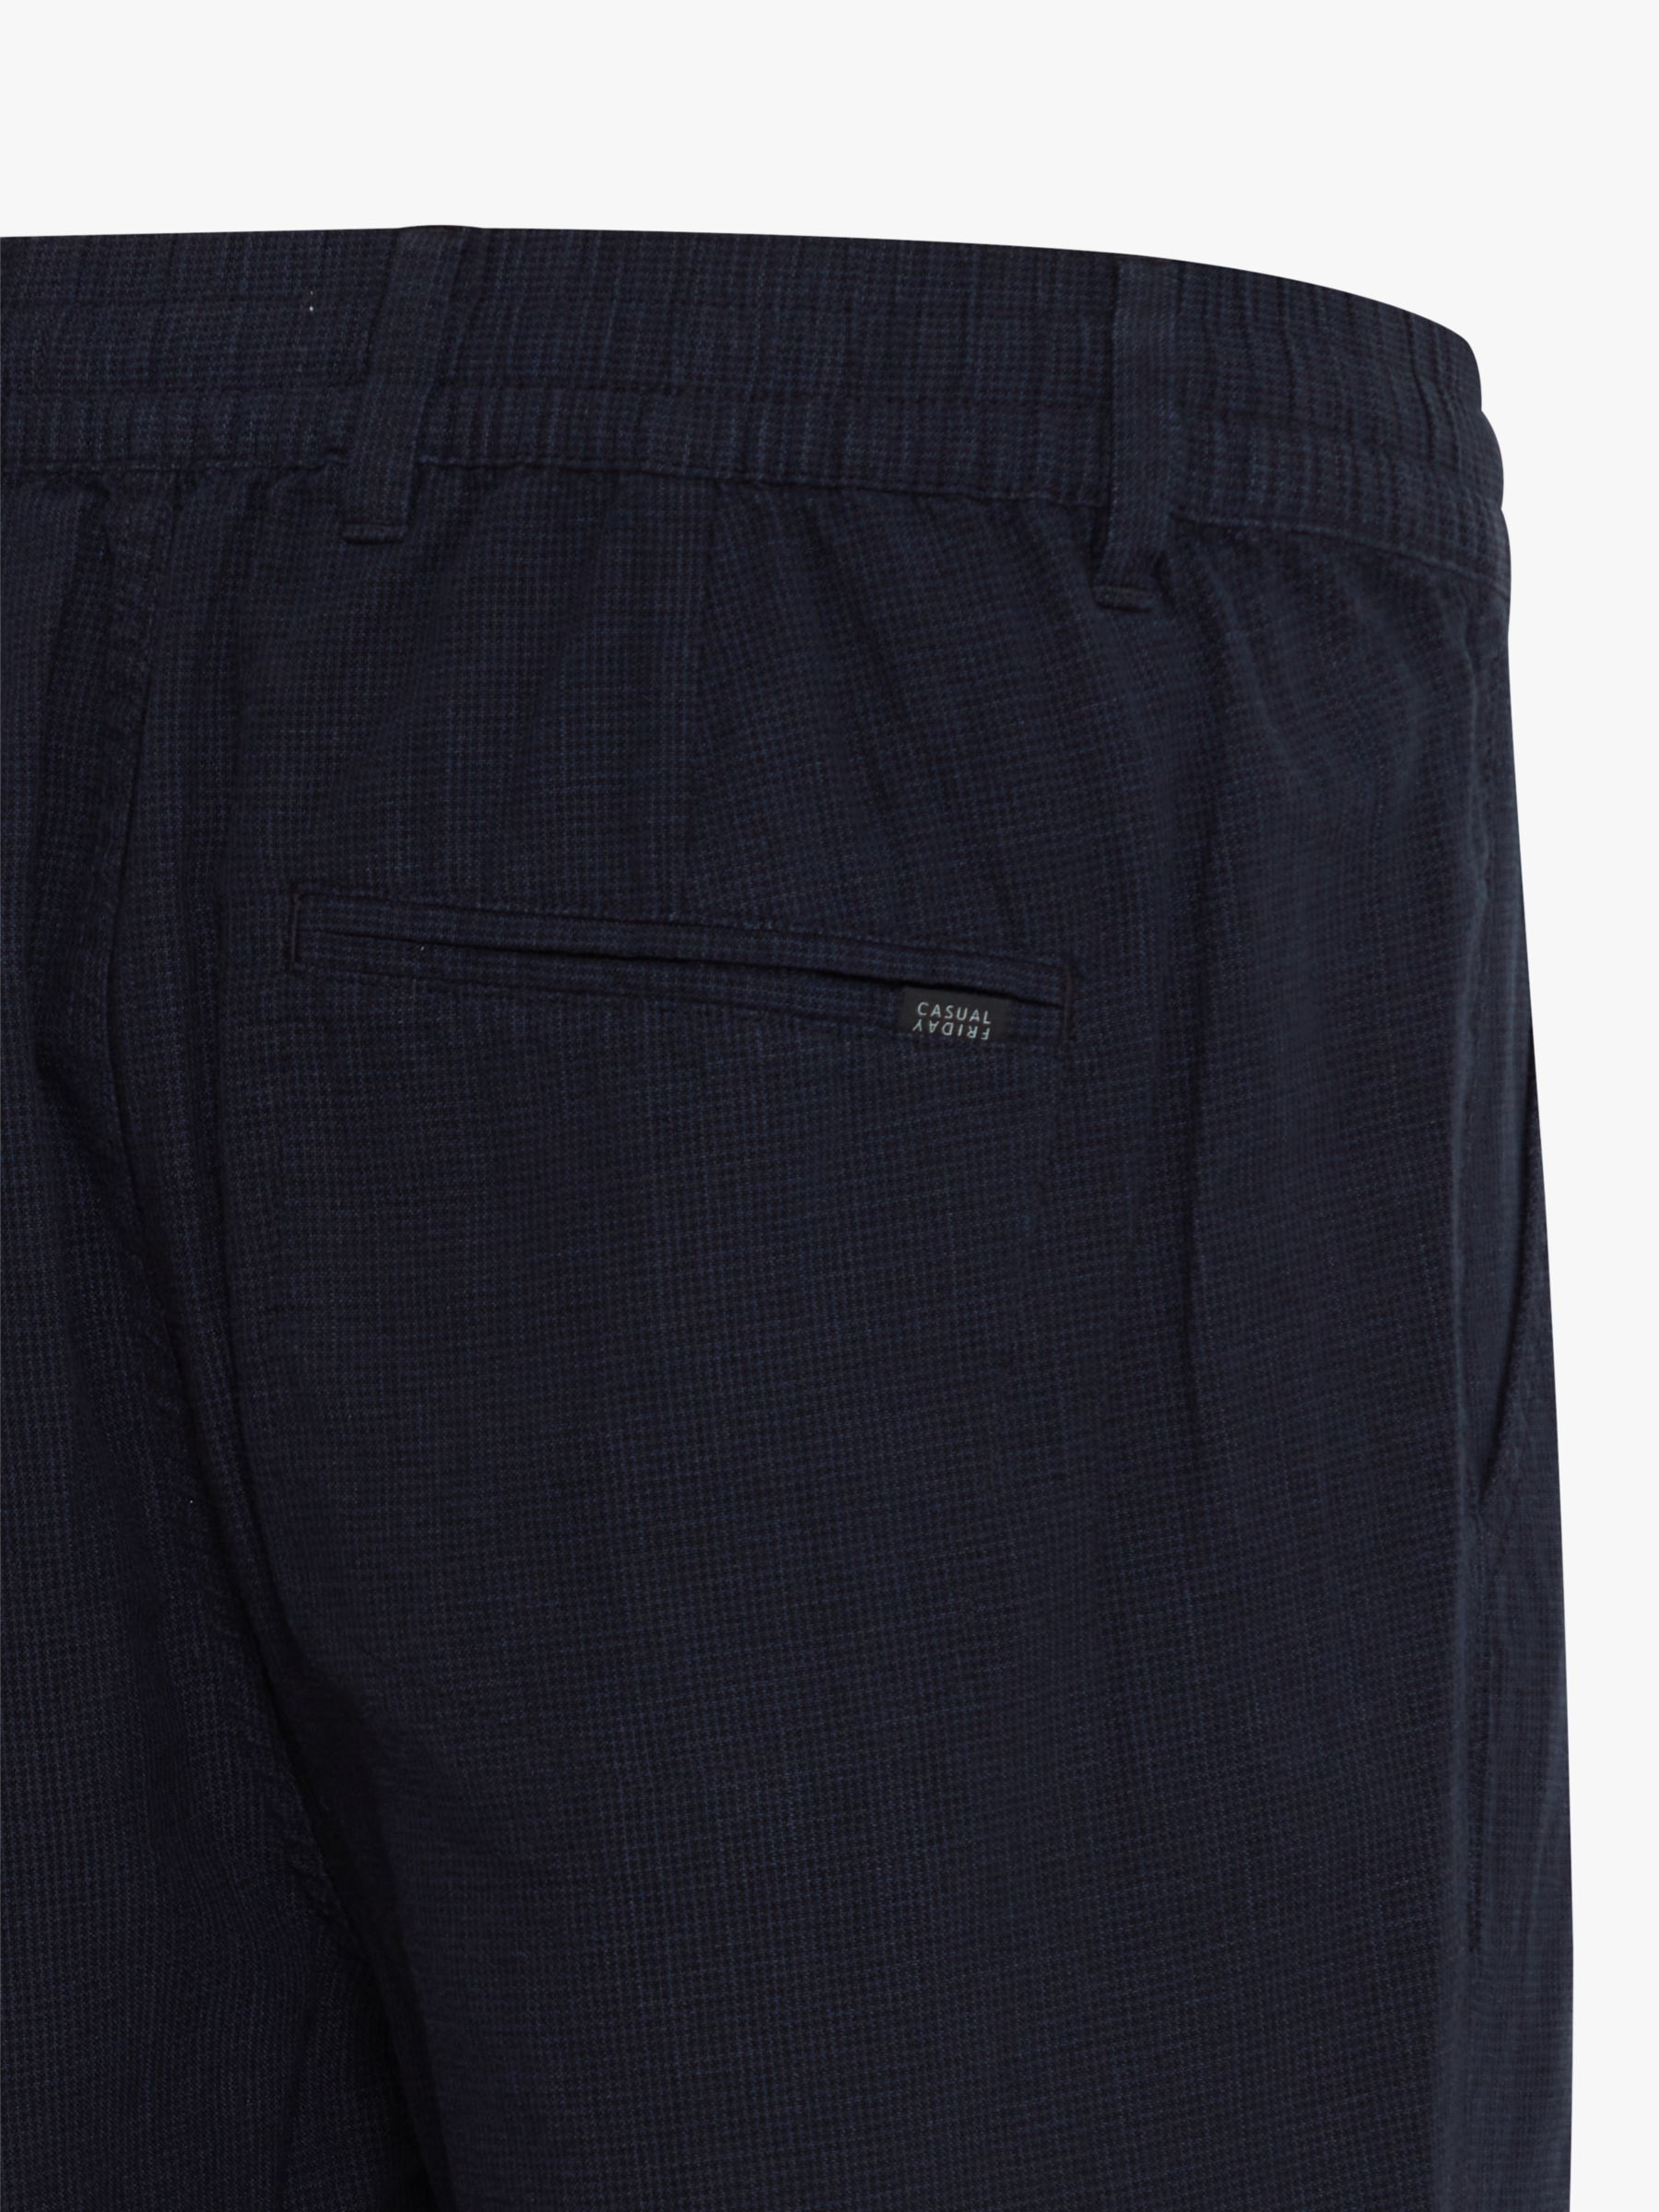 Buy Casual Friday Rand Houndstooth Linen Mix Shorts, Dark Navy Online at johnlewis.com